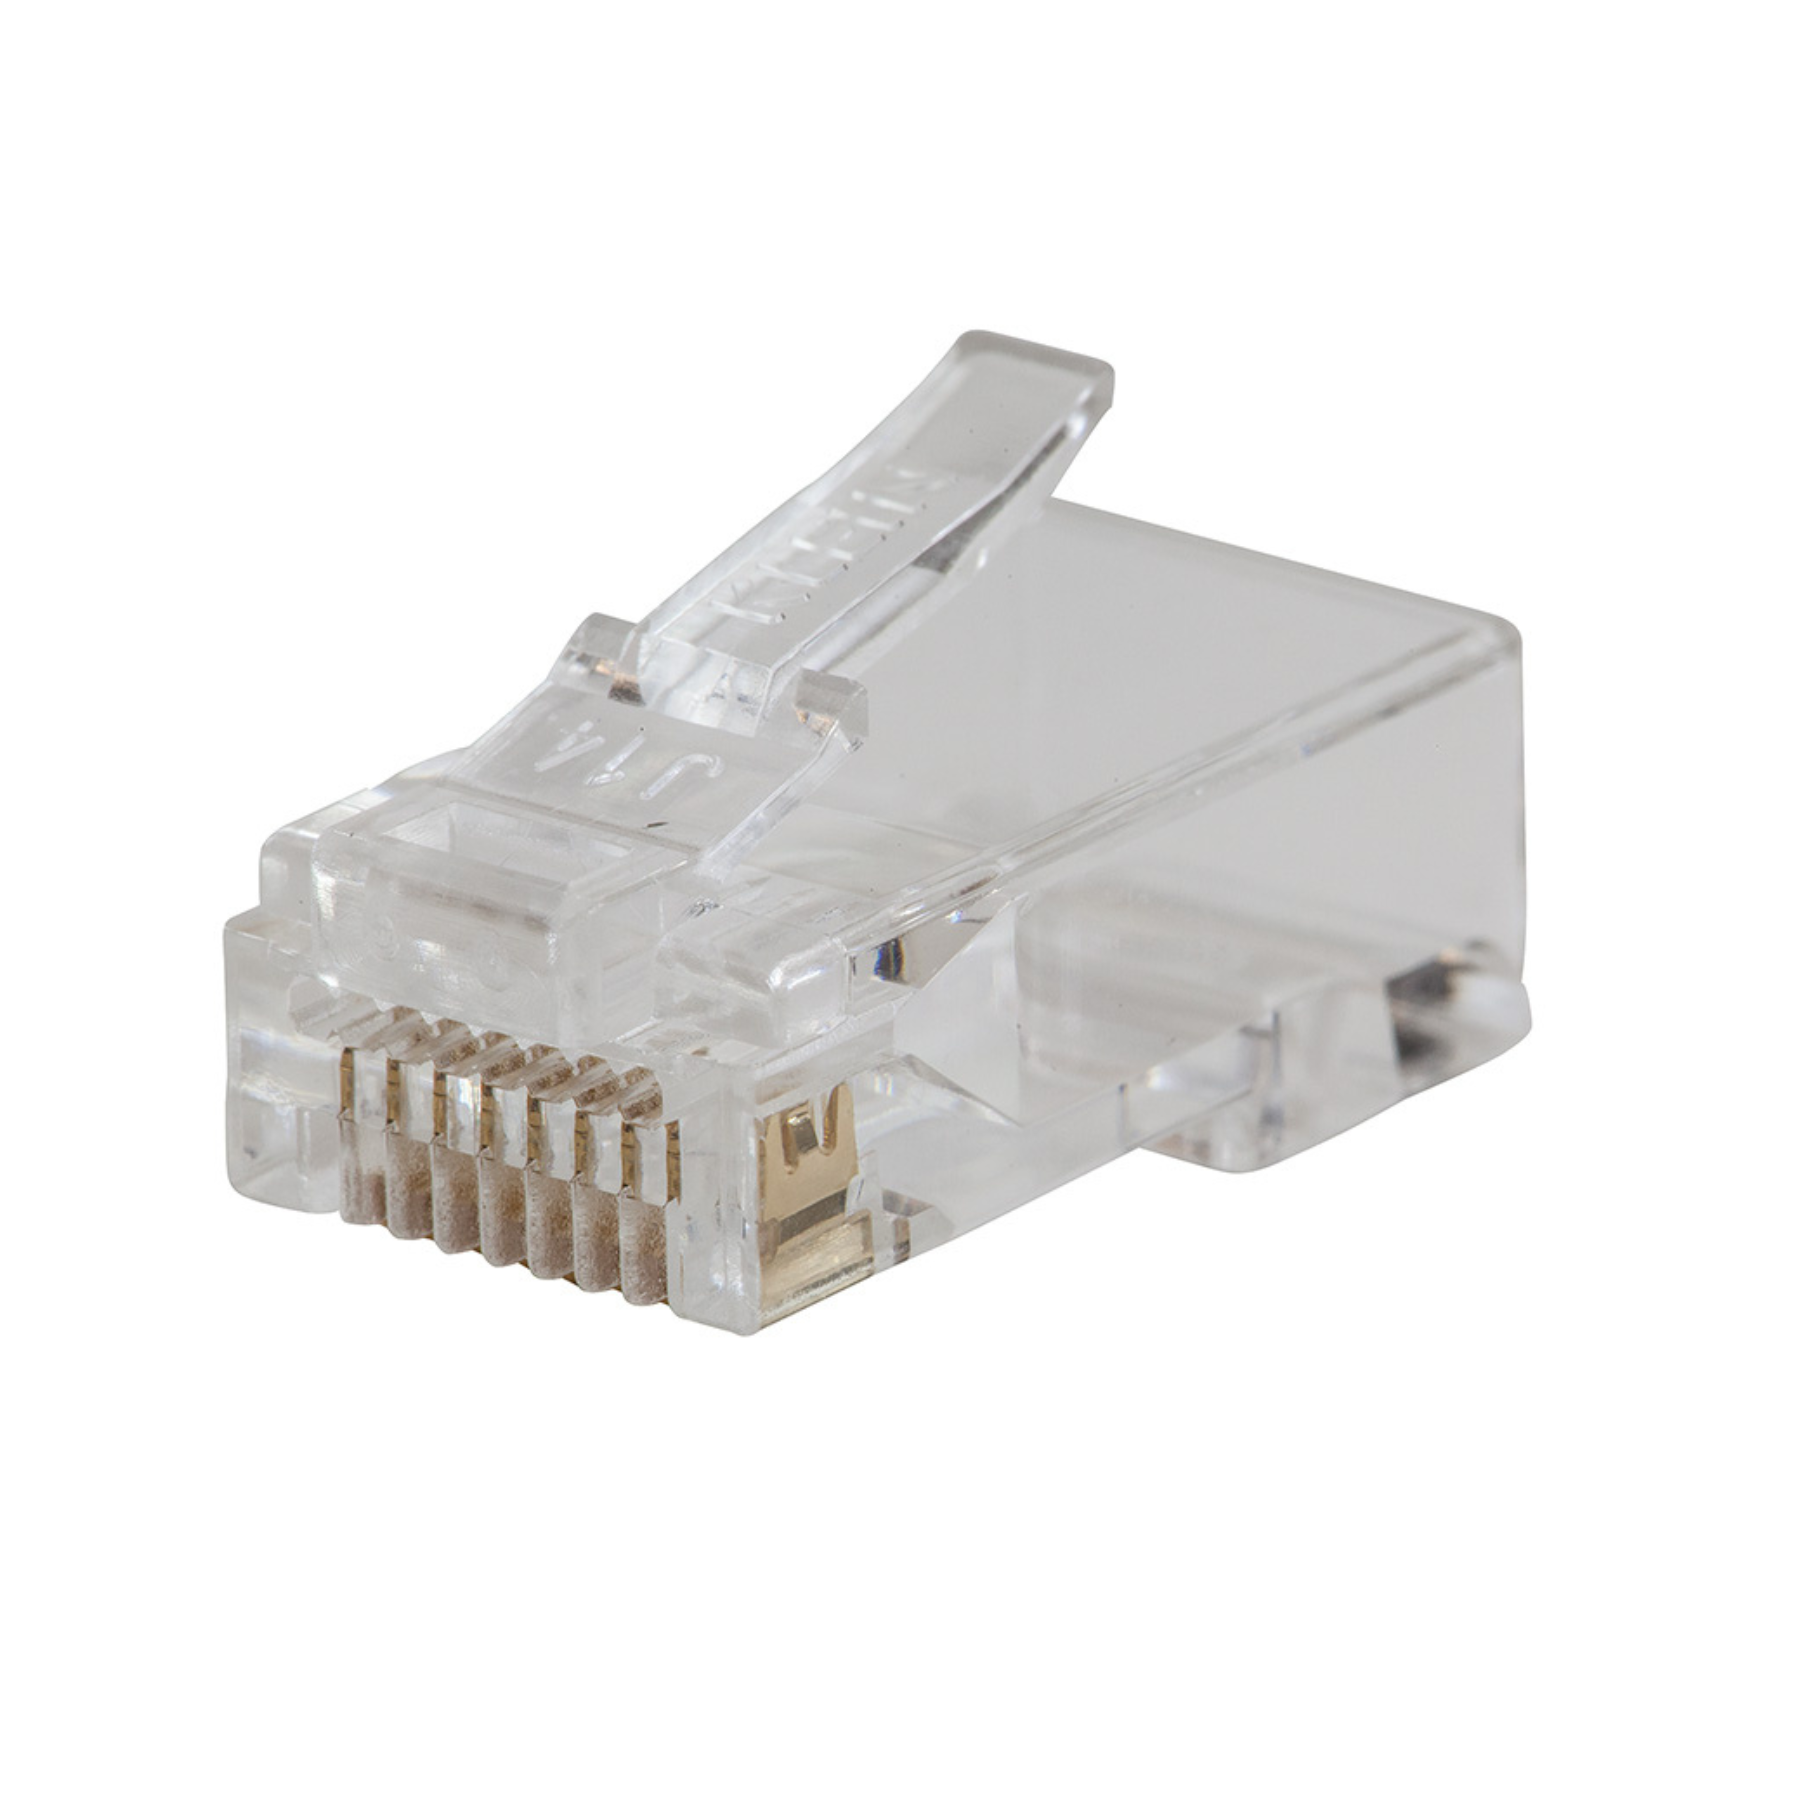 Pass-Thru™ Modular Data Plug, RJ45- CAT5E, 50-Pack Exclusive Klein-designed CAT5e Pass-Thru™ modular plugs for fast, reliable connector installations for data applications. Cable easily passes through connector for consistent and secure termination. Saves time, trims flush to end face when used with Klein Tools Pass-Thru™ Modular Crimper VDV226-110, and eliminates wasted materials.